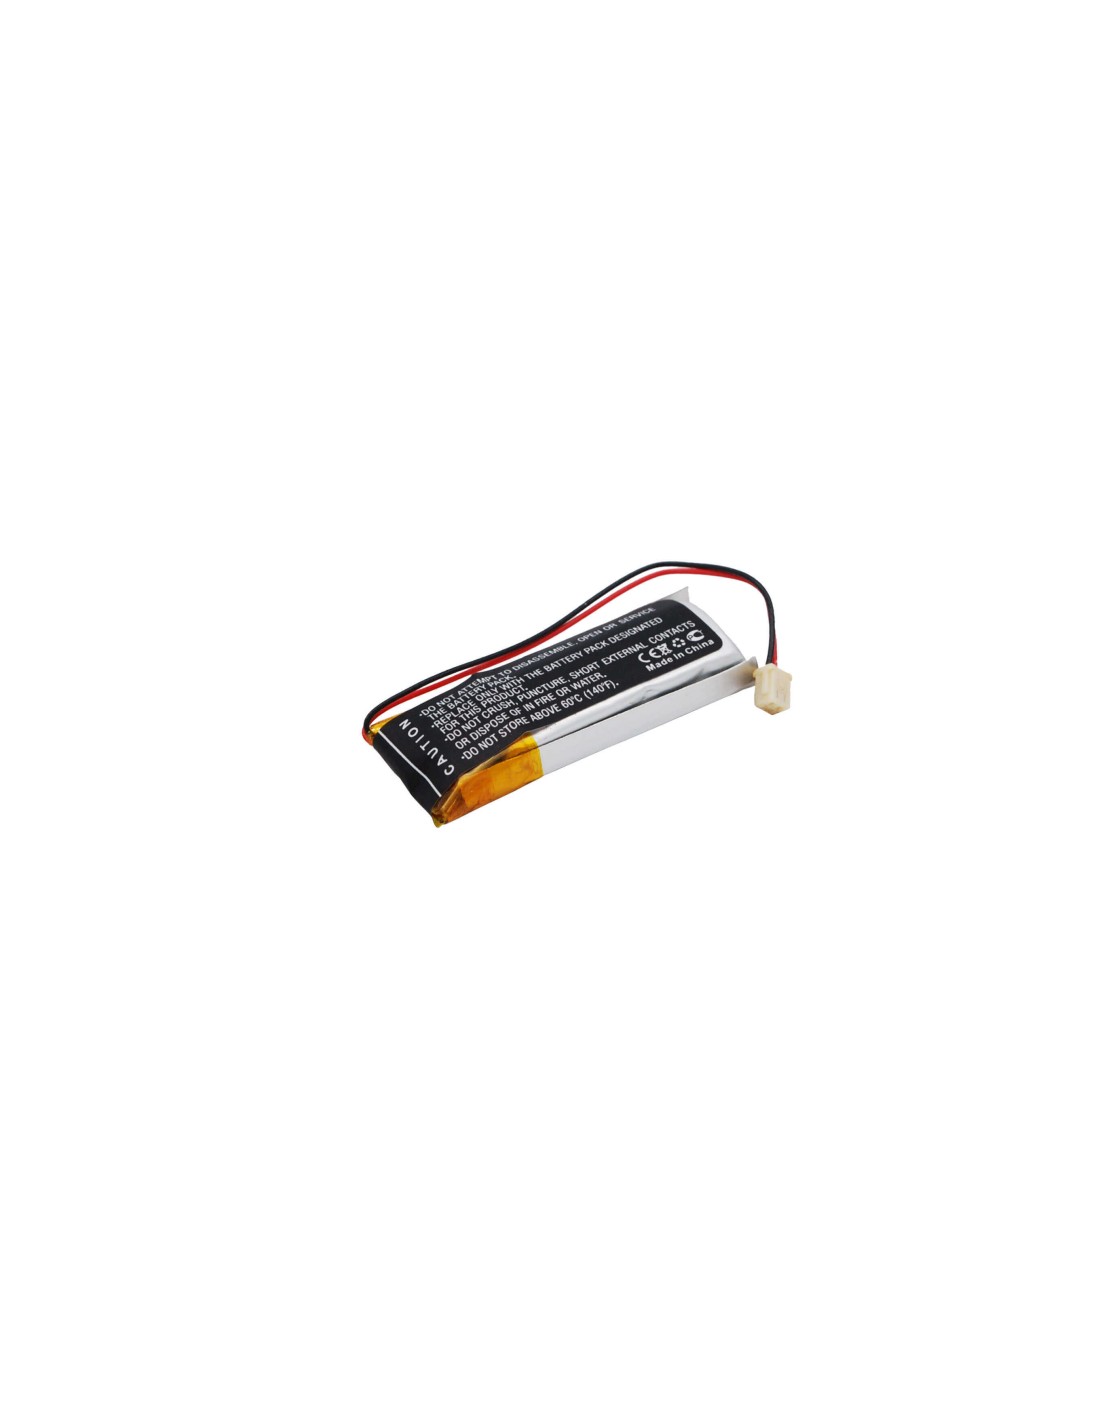 Battery for Sony Dr-bt160, Dr-bt160as 3.7V, 250mAh - 0.93Wh